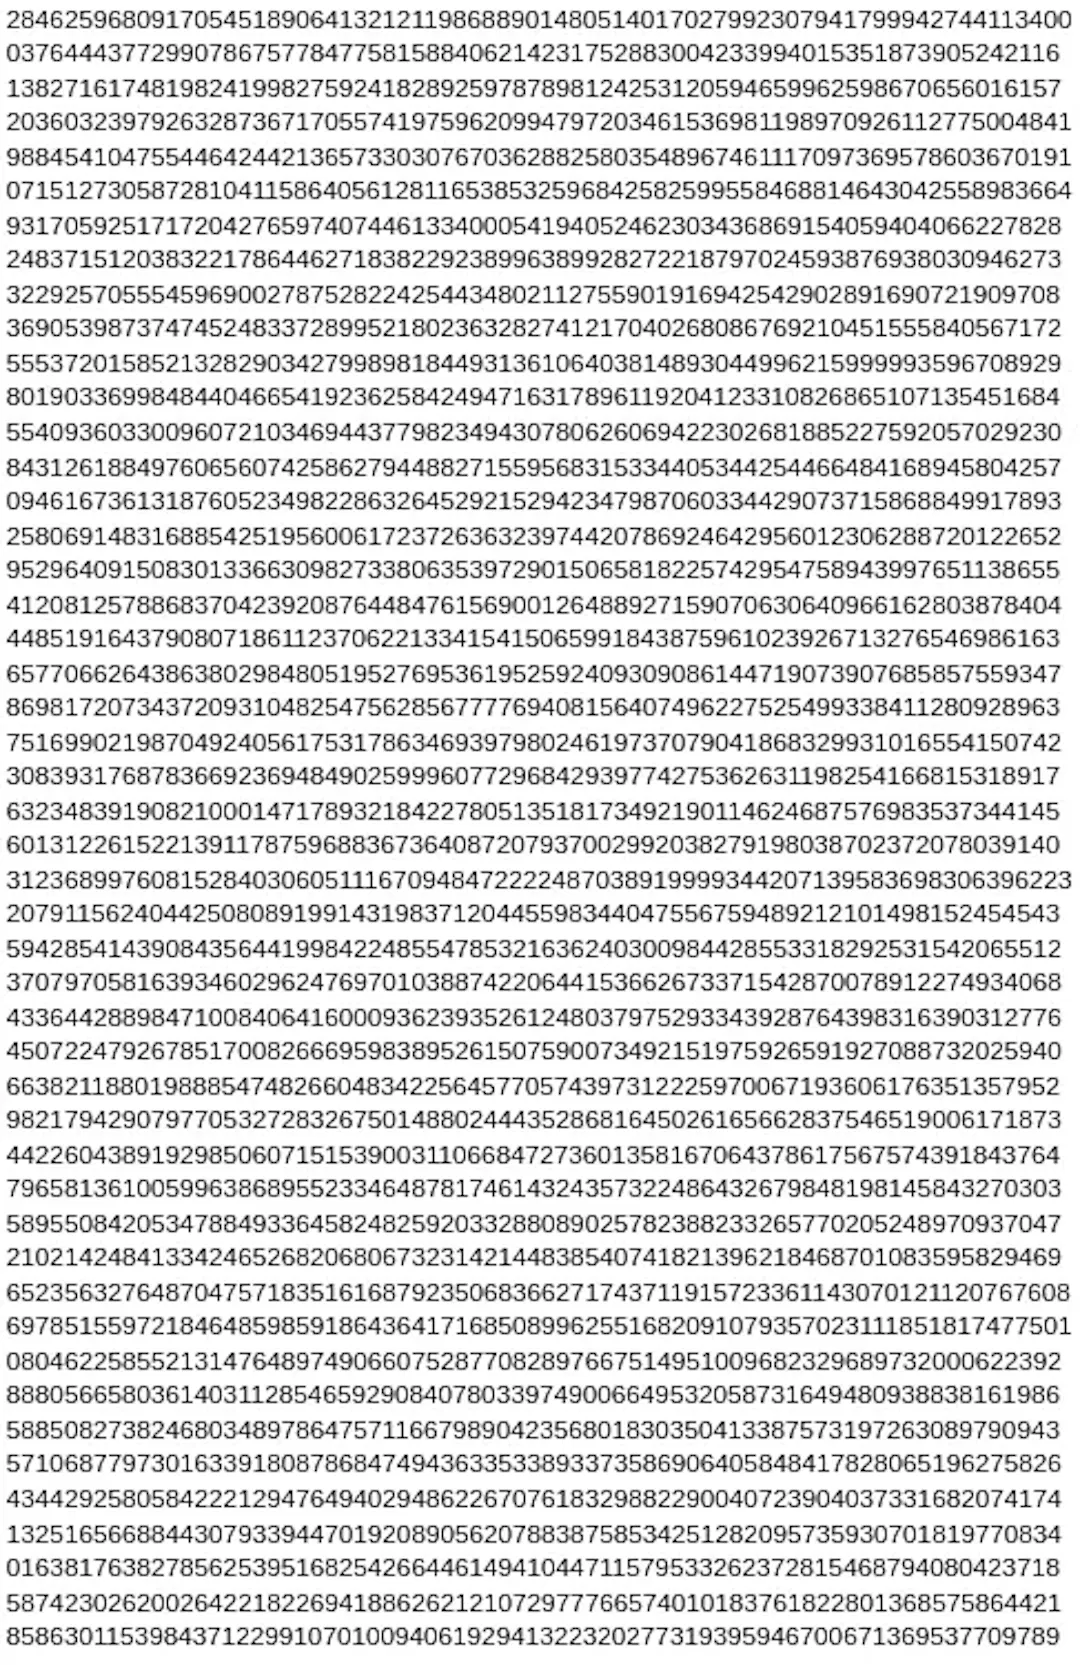 35000 digits of 10000!